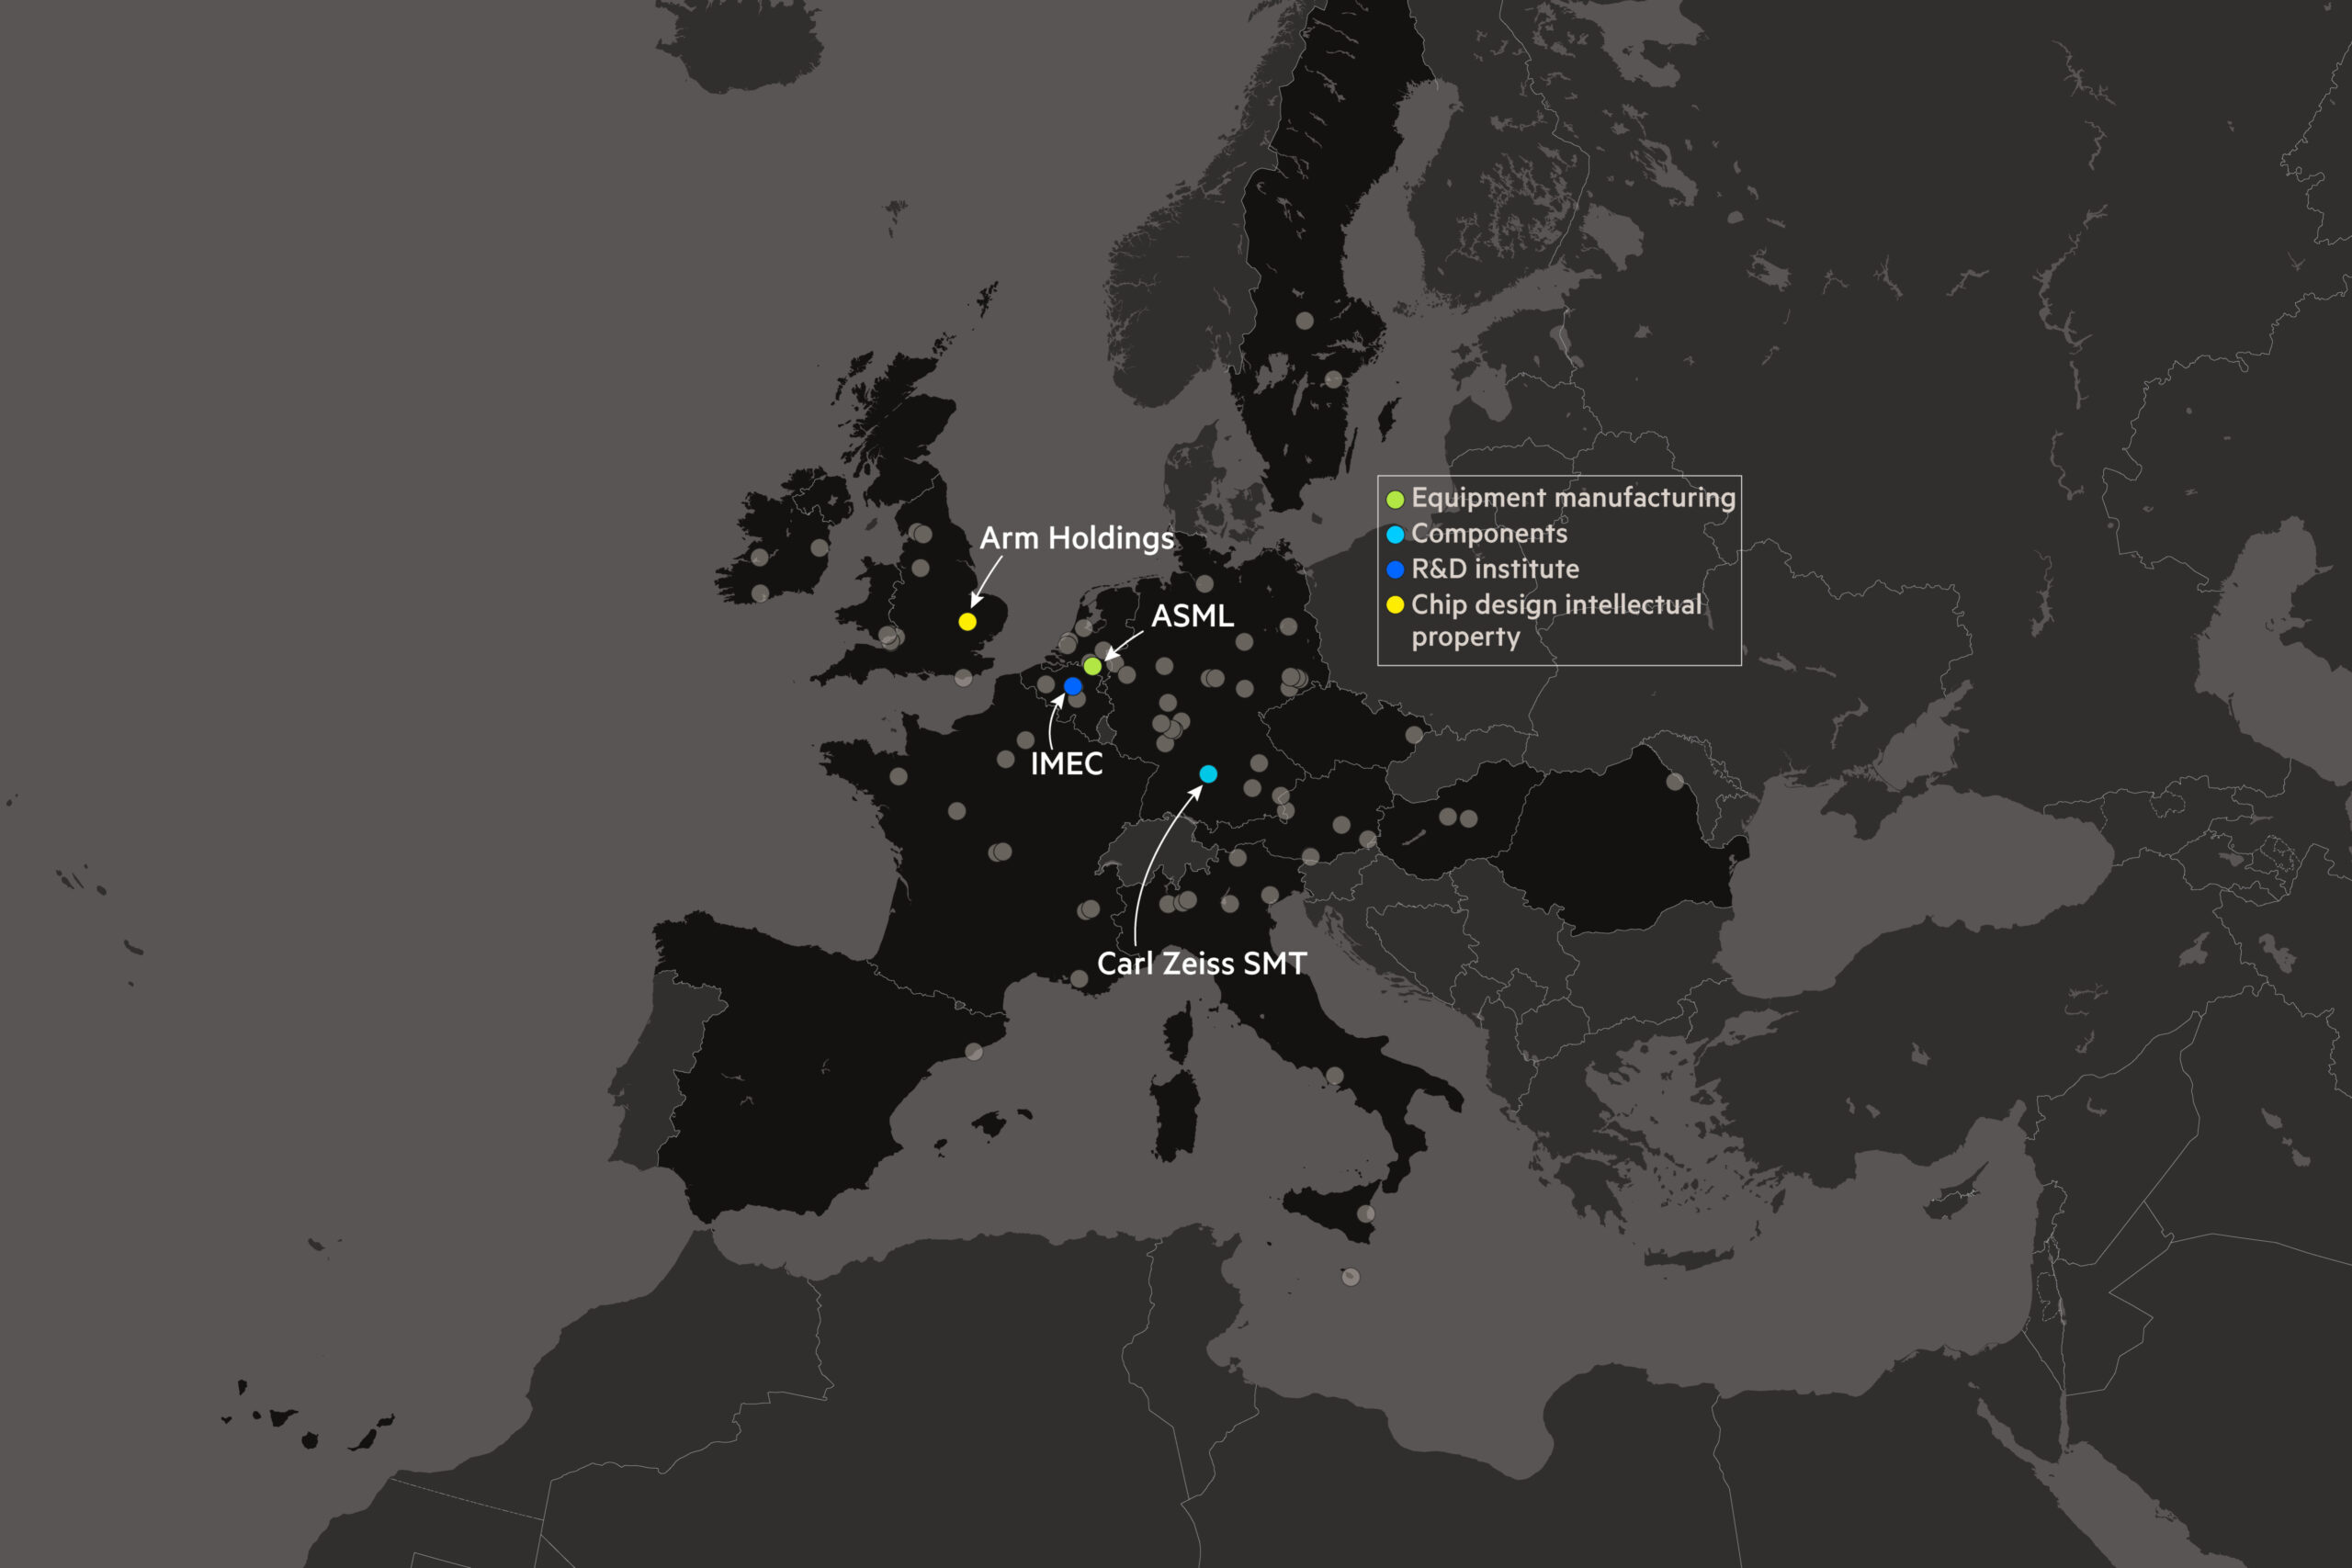 A map highlight the locations of Arm, ASML, IMEC and Carl Zeiss SMT